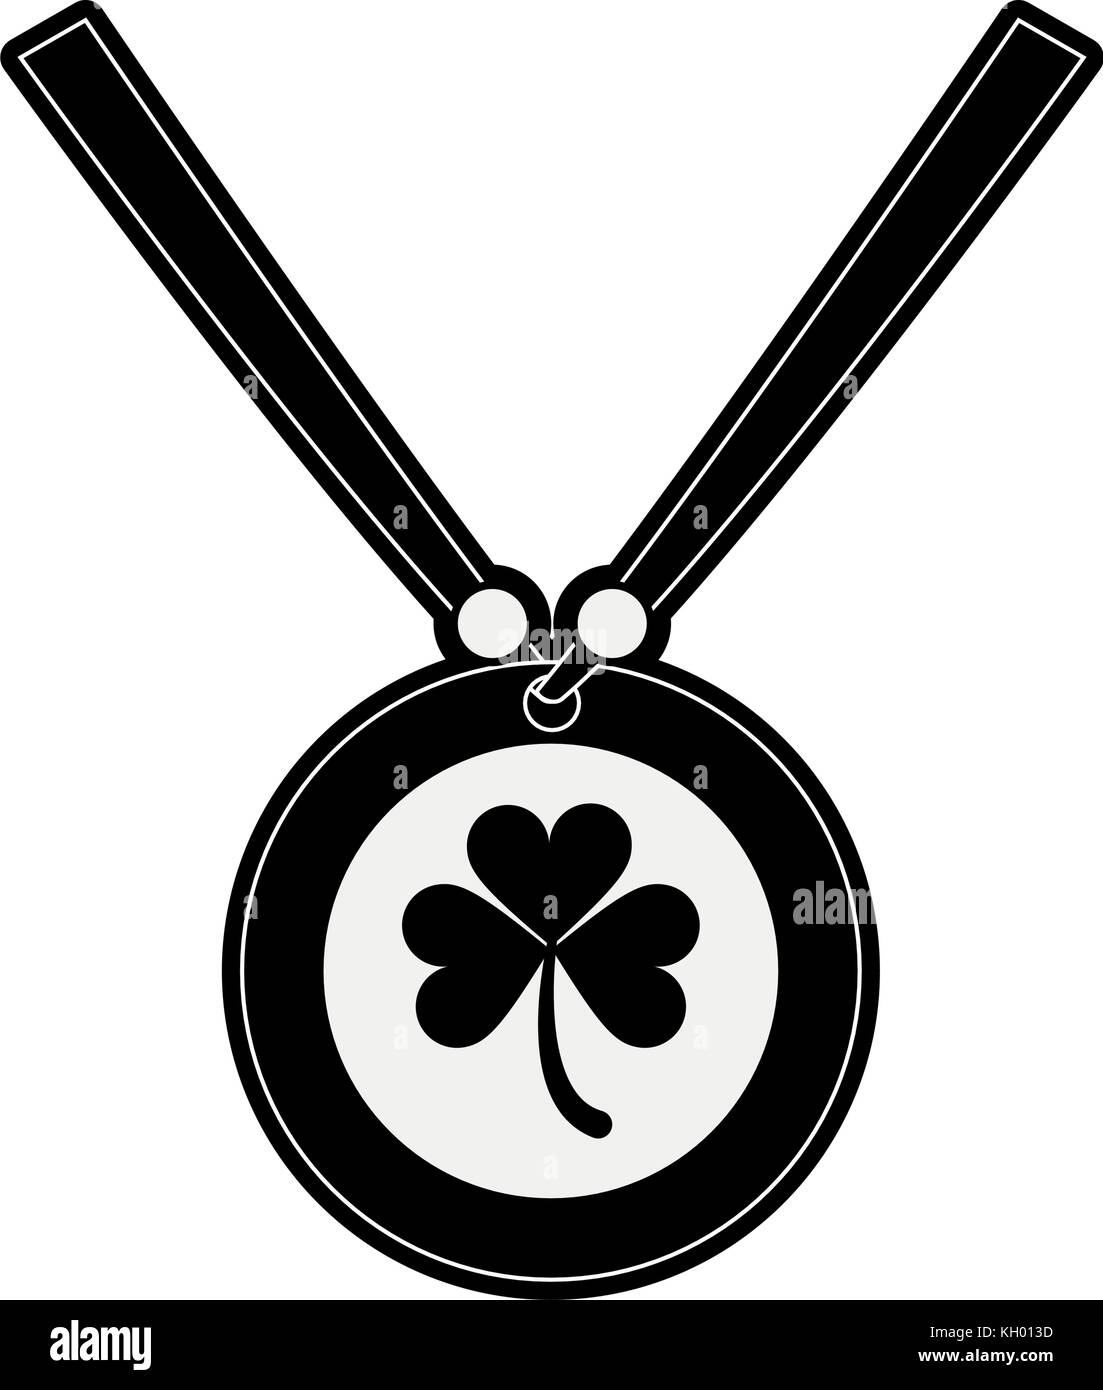 Medal with clover Stock Vector